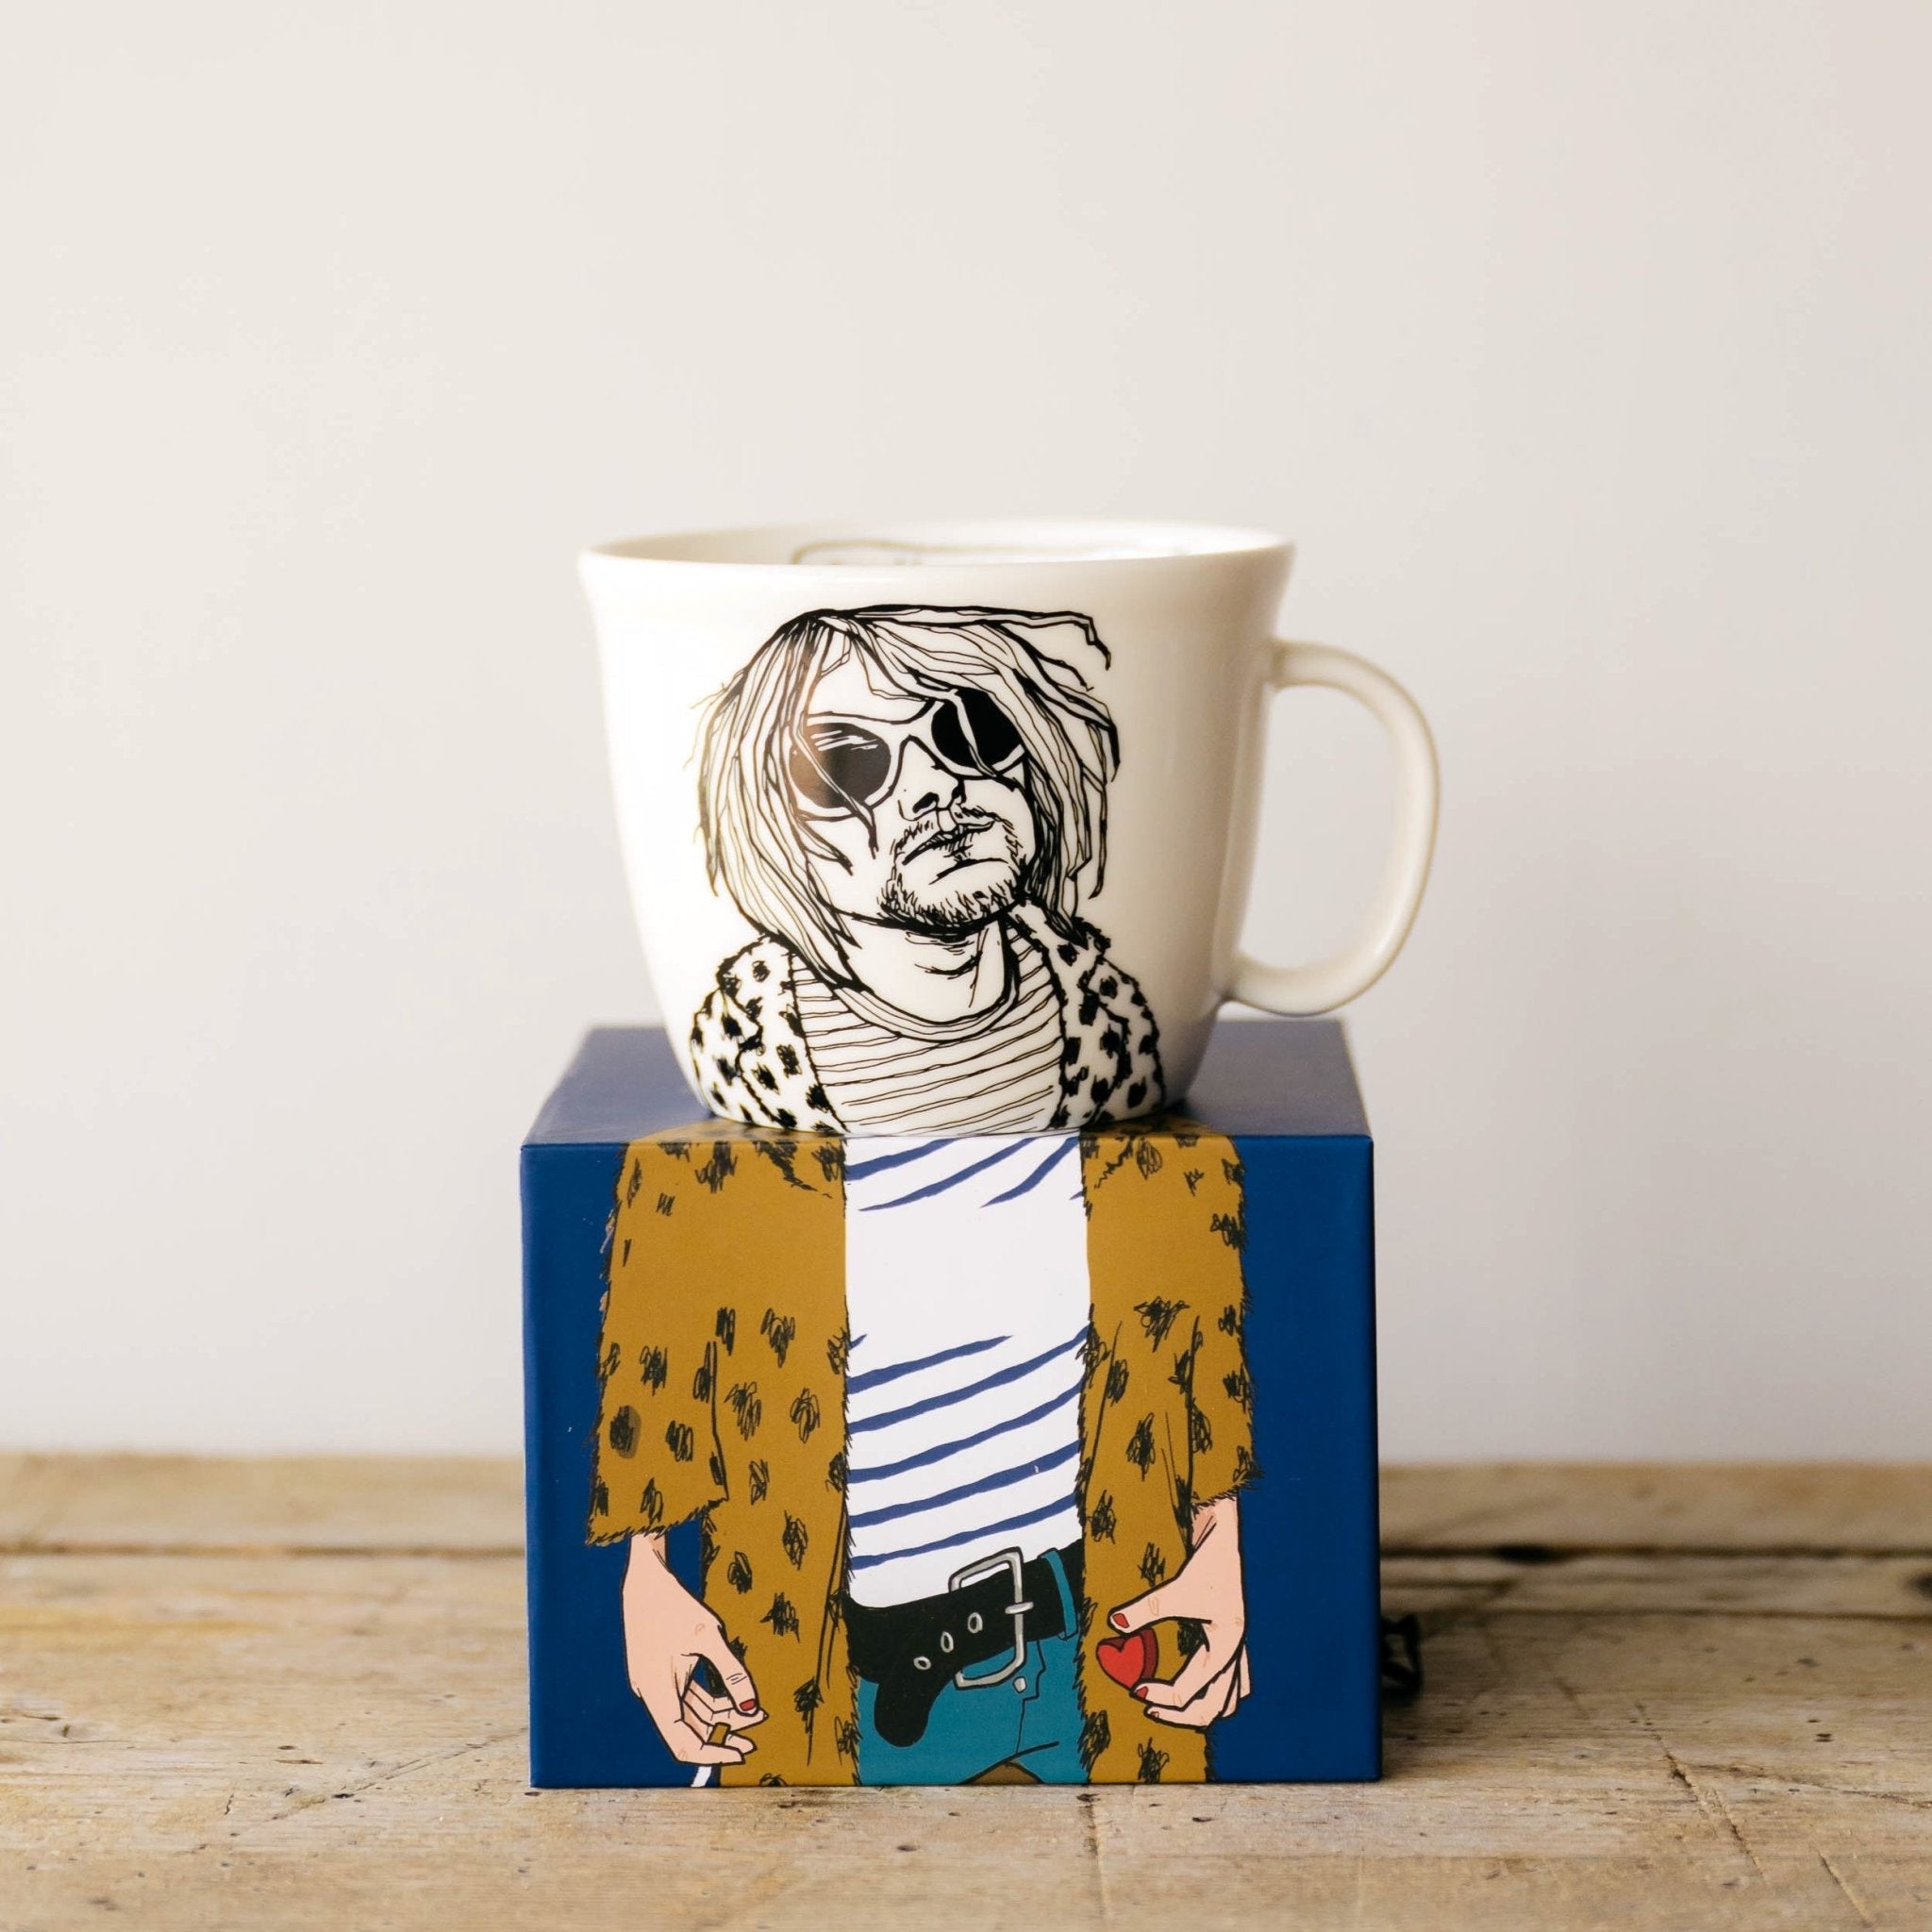 Porcelain cup inspired by Kurt Cobain on the box